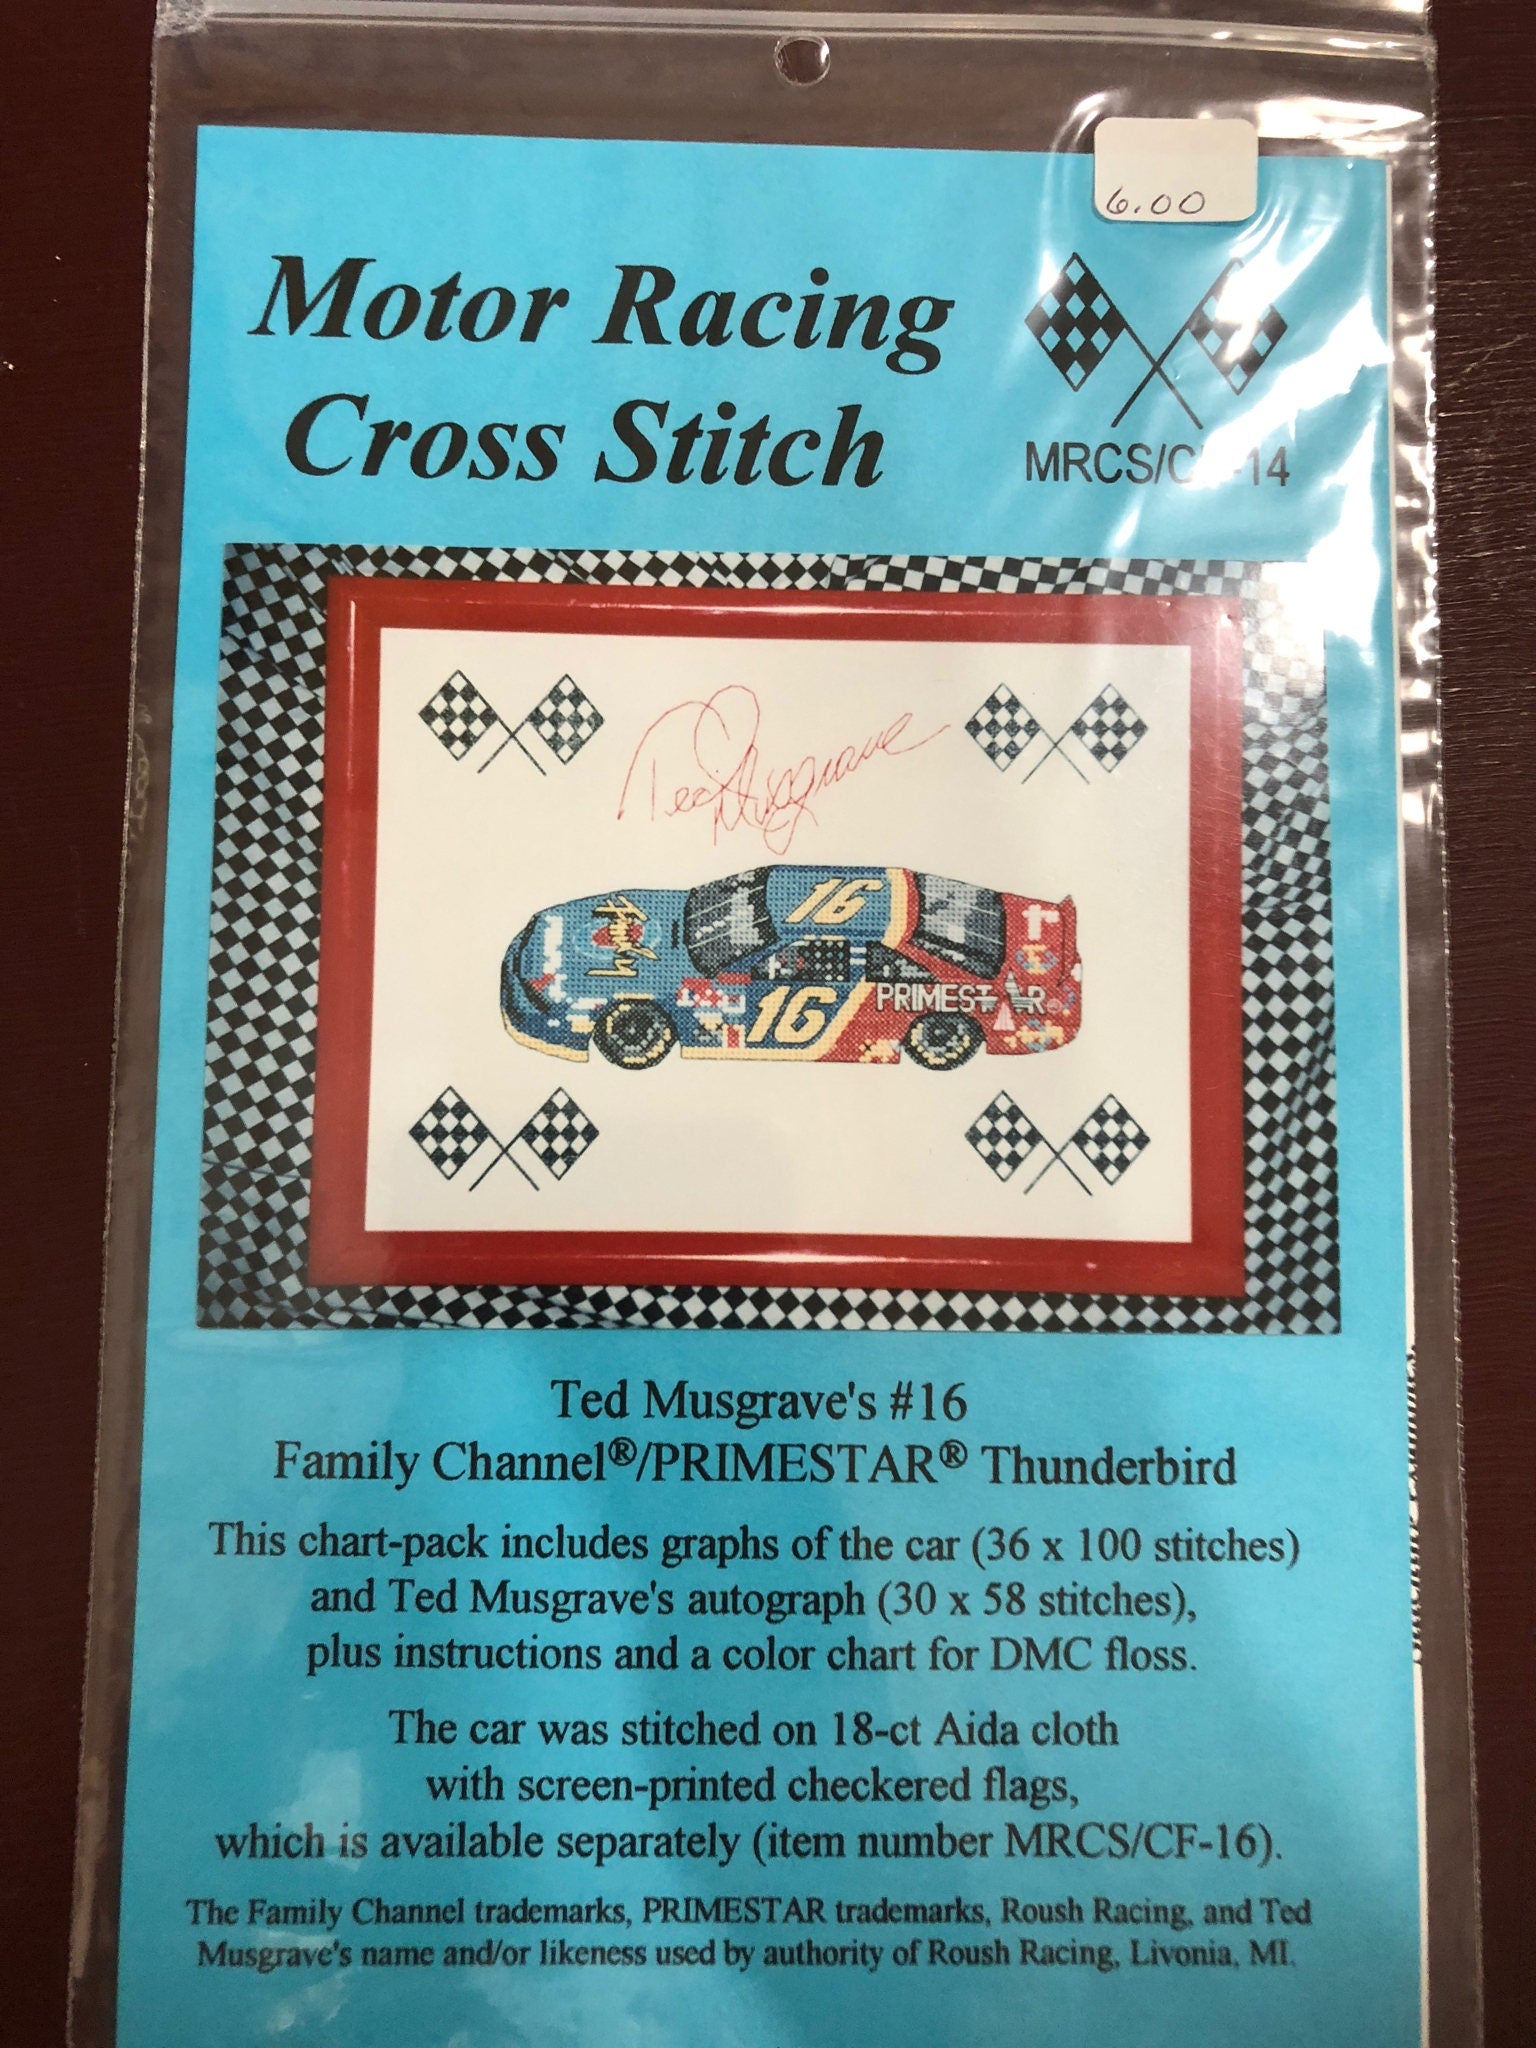 Number 16, Ted Musgrove's, Thunderbird Vintage Motor Racing Cross Stitch Chart